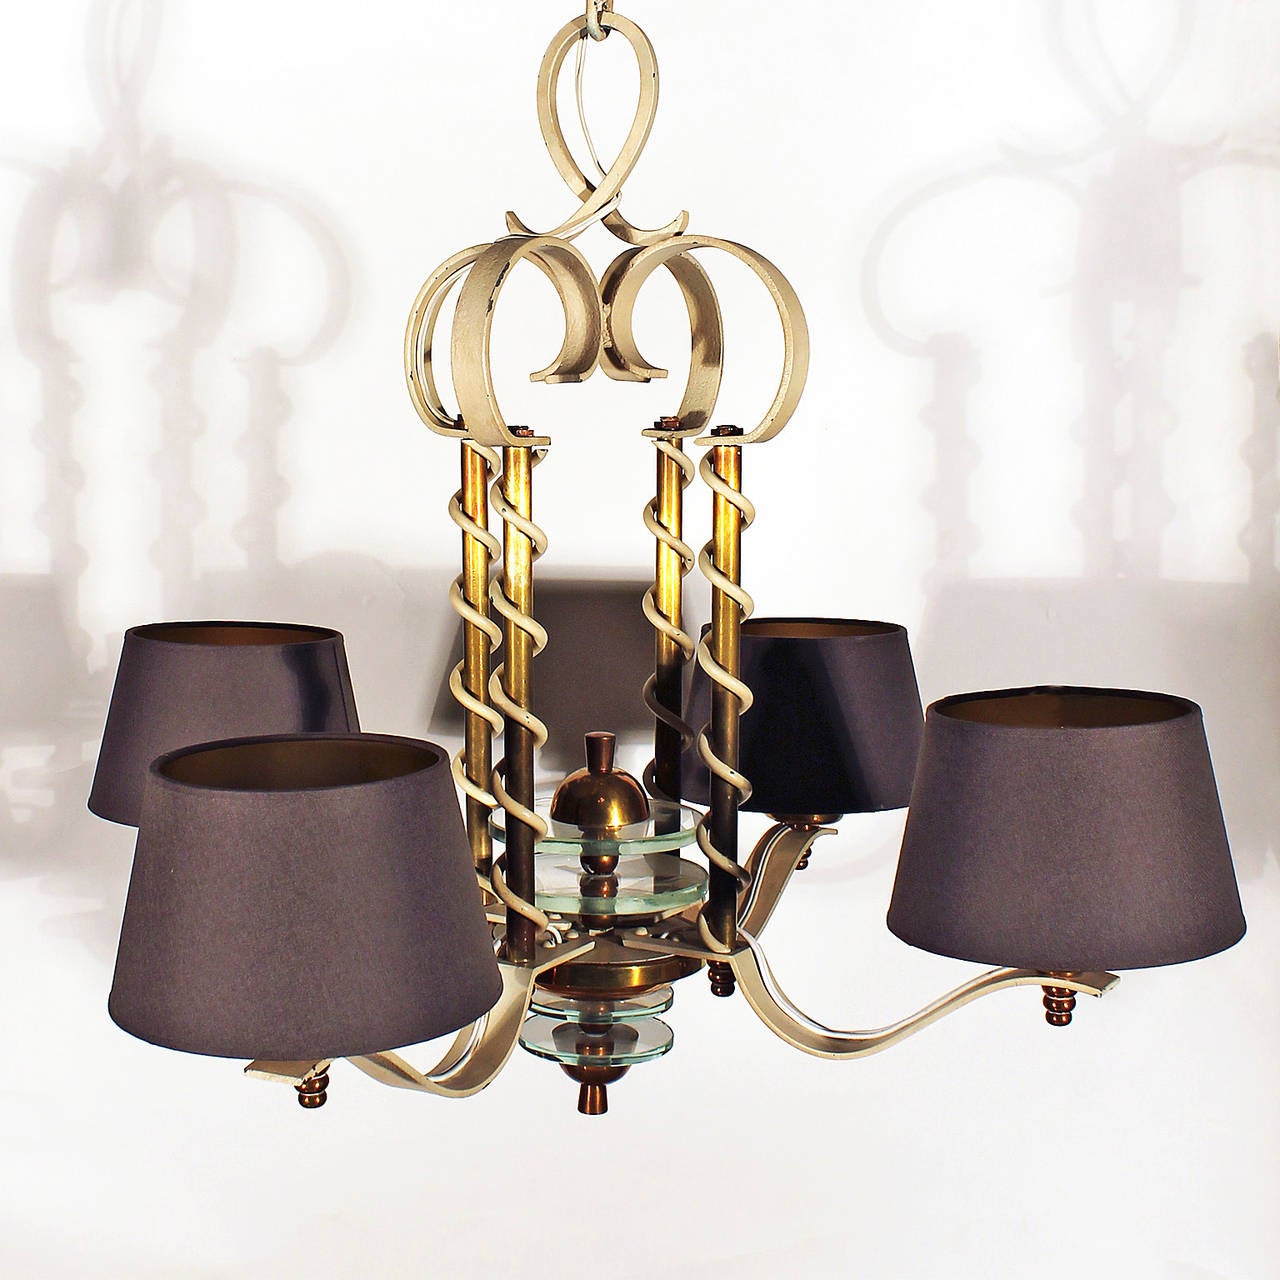 Spectacular small chandelier, ivory lacquered wrought iron and brass, decorative centerpiece with four thick glass plates, four lights, golden and grey lampshades.
France circa 1940